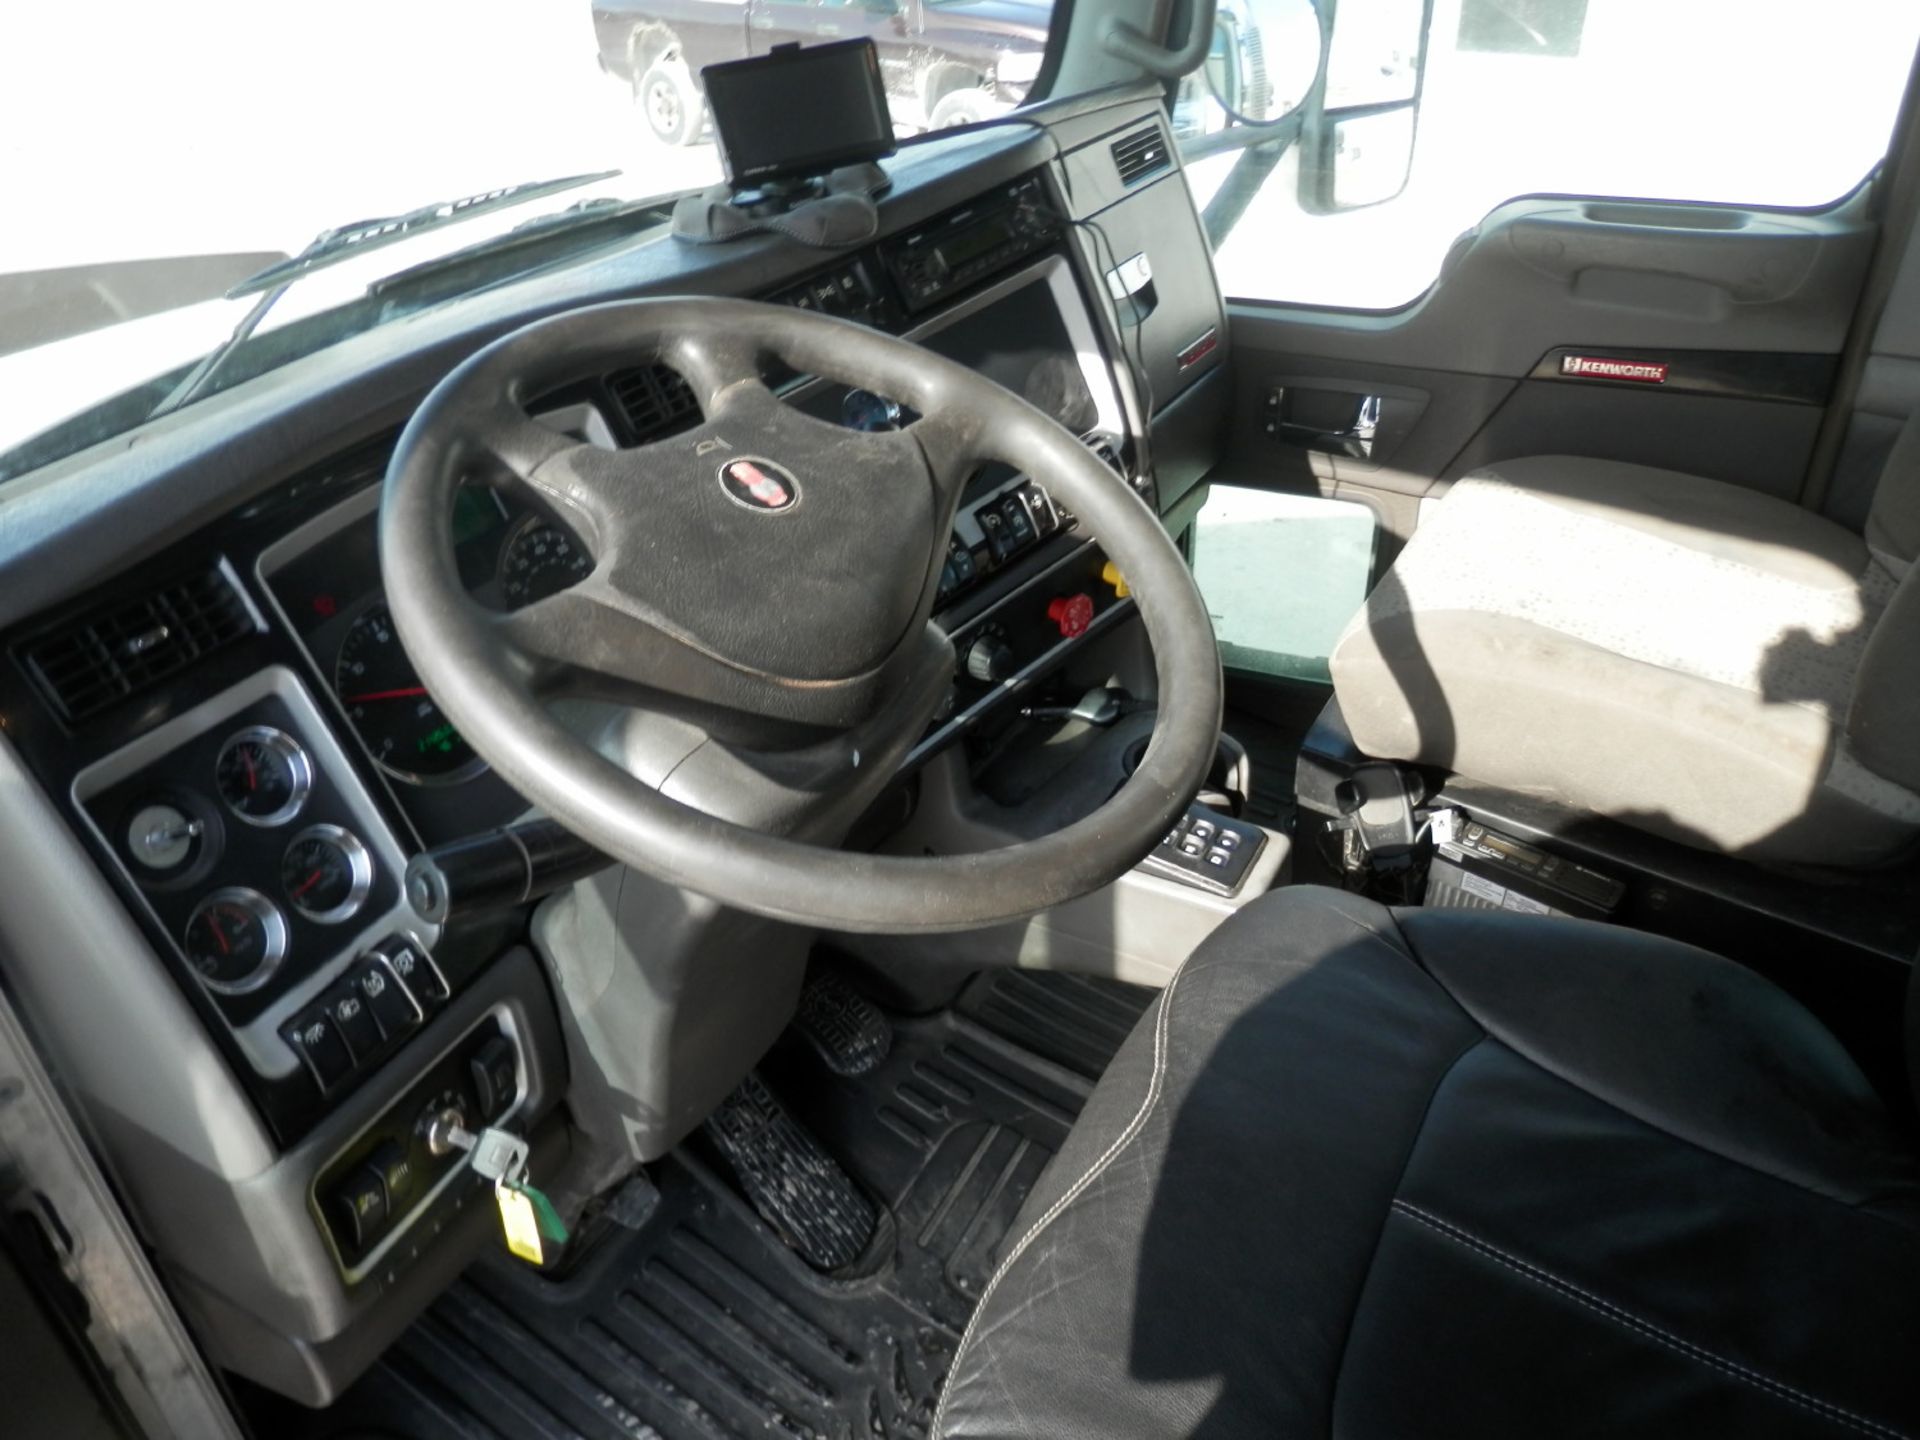 2013 KENWORTH T800 DAY CAB SEMI TRACTOR -(TRUCK #16) - Image 10 of 20